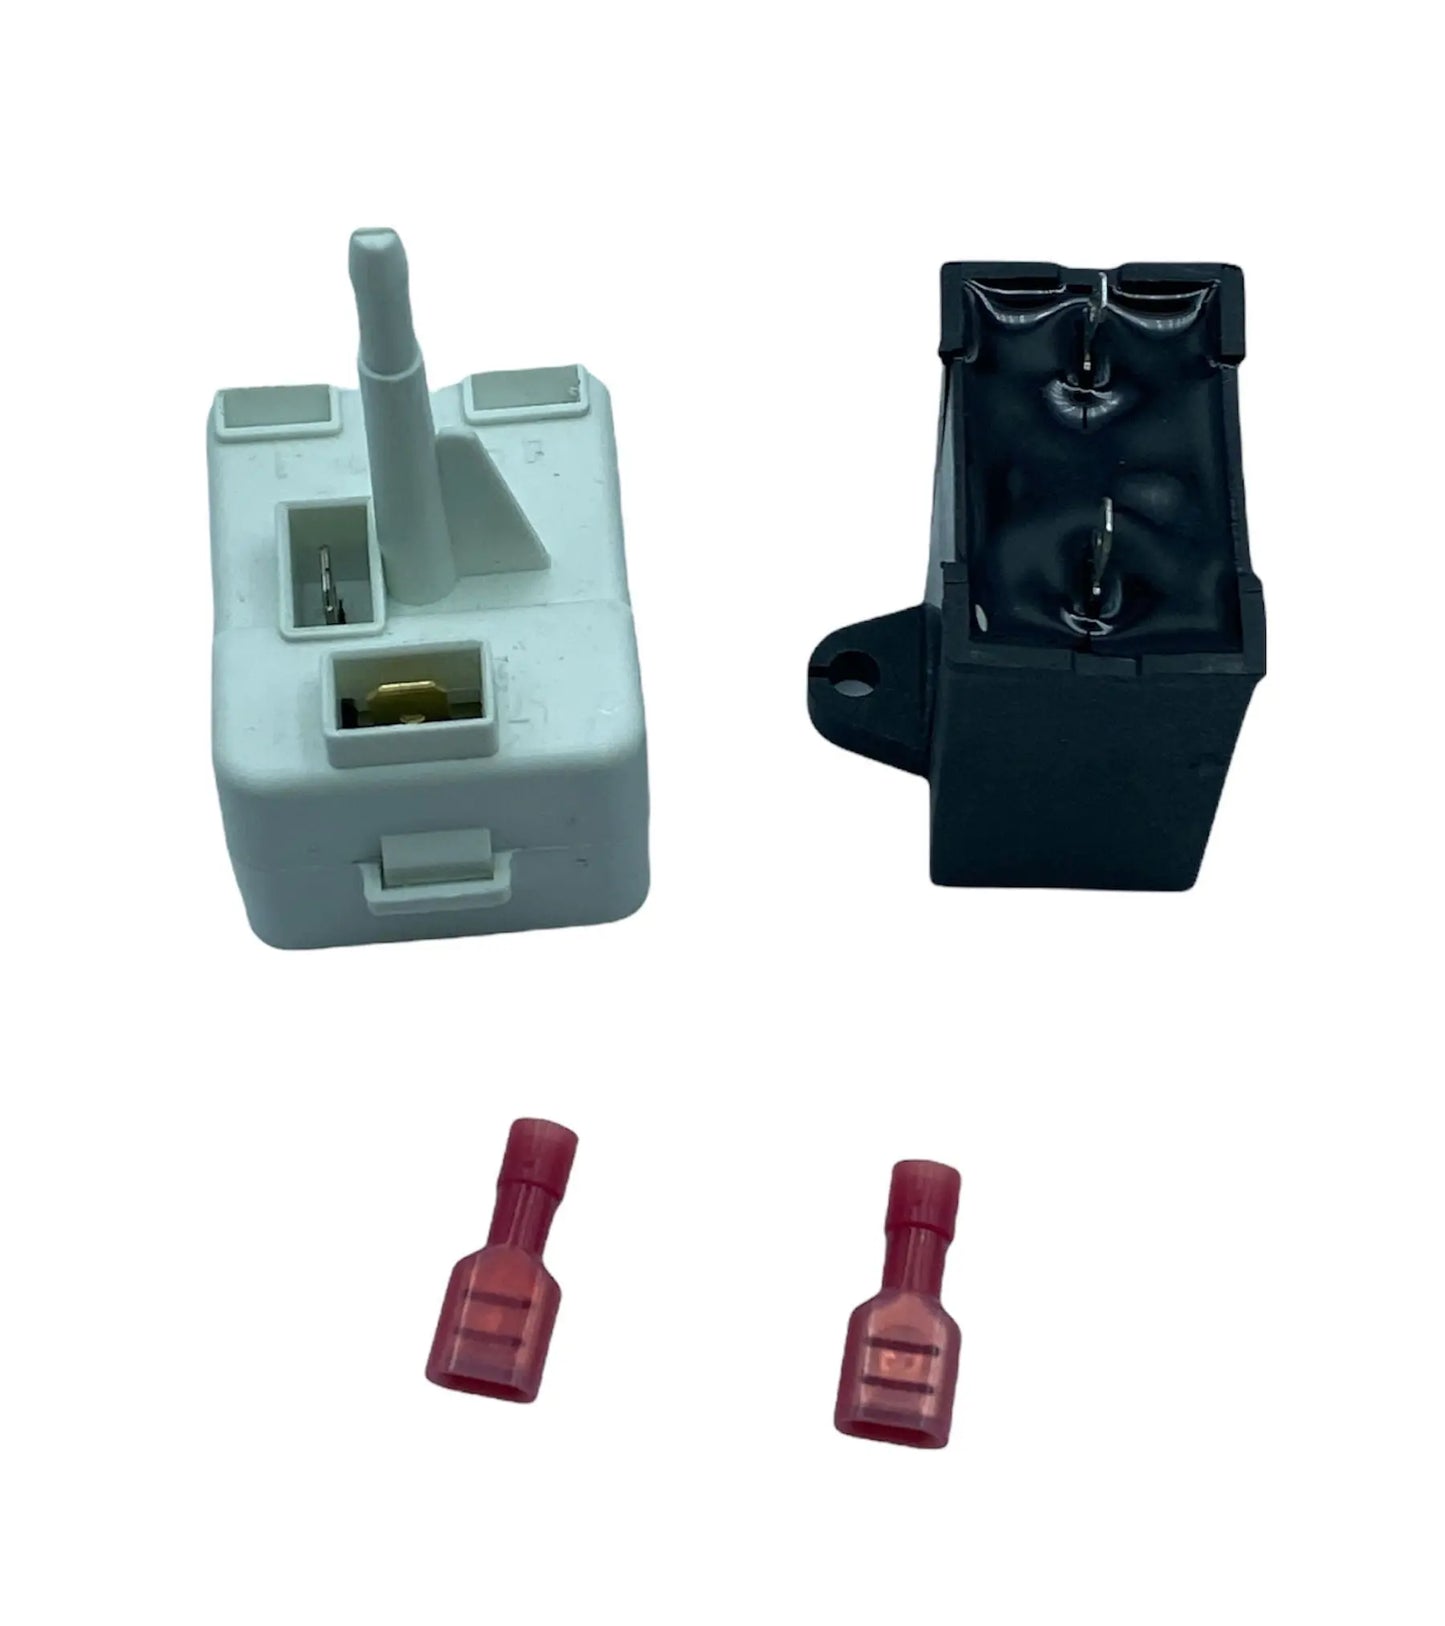 G.E Refrigerator Start Device Kit - WR07X10143 or WR01F01682, REPLACES: 1812125 AH2577843 AP4538935 EA2577843 EAP10055909 EAP2577843 PS2577843 WR07X10143 PD00051509 INVERTEC